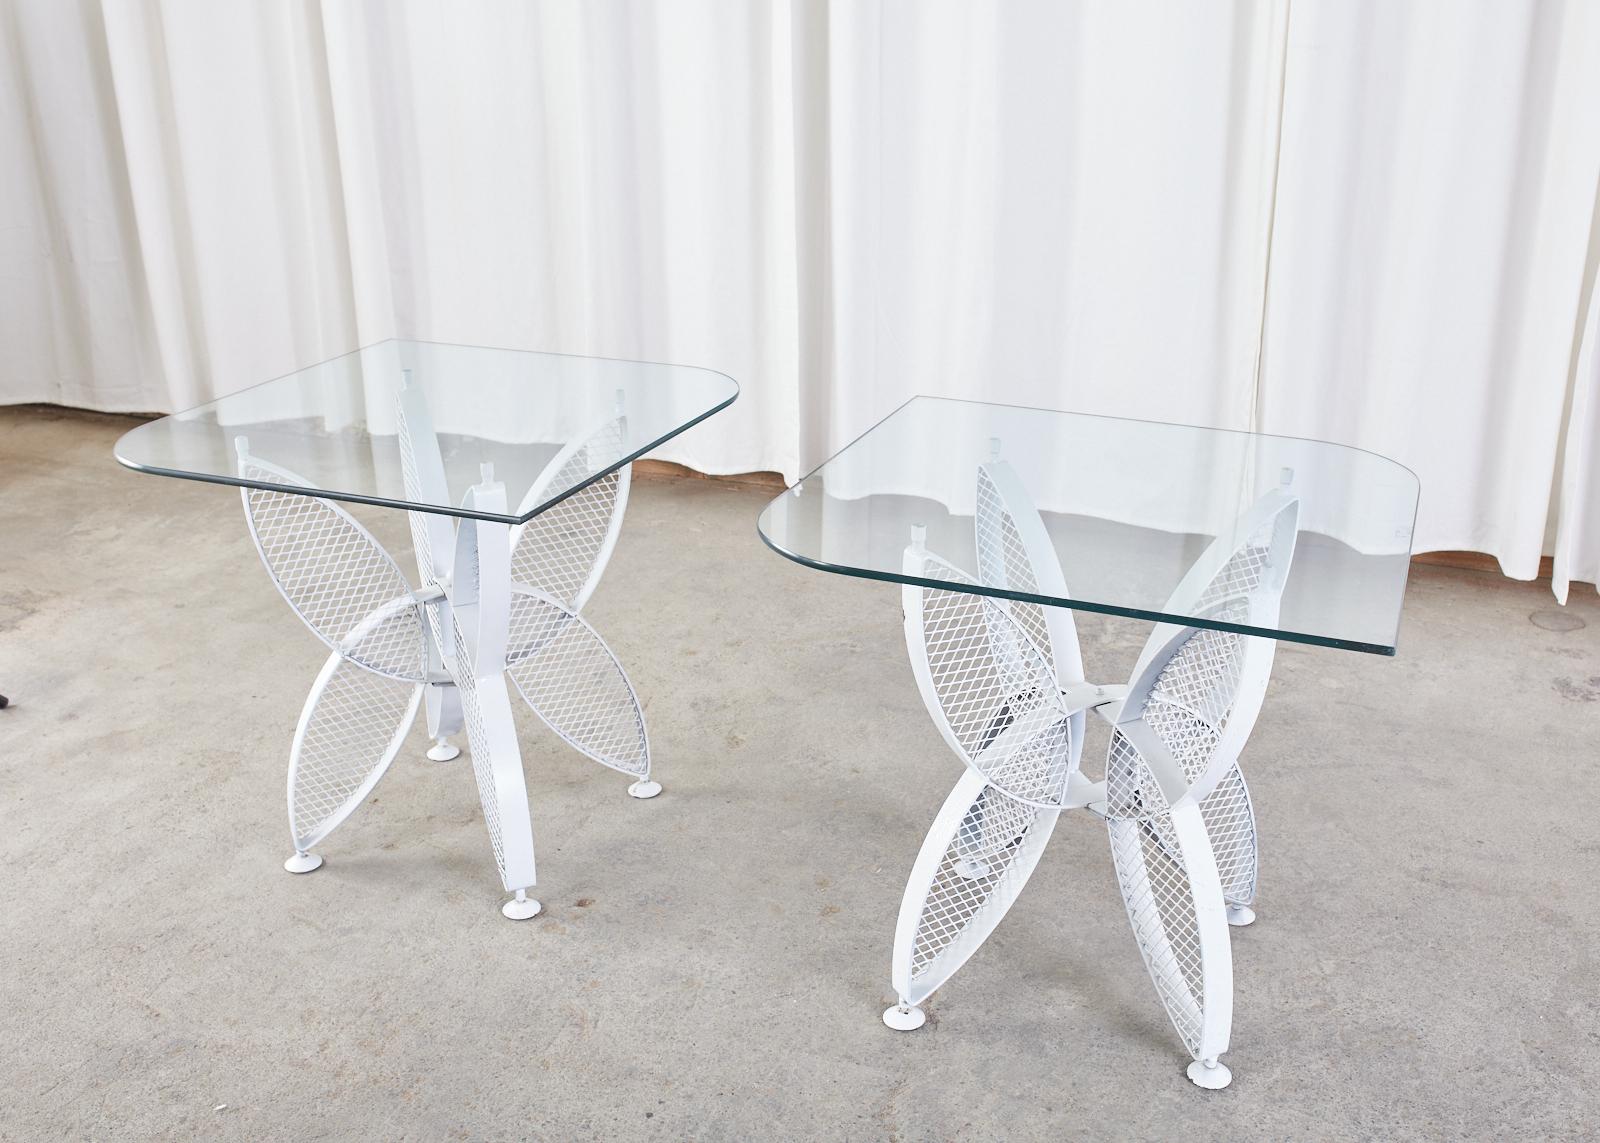 Mid-Century Modern iron butterfly drinks tables designed by Maurizio Tempestini for John Salterini. Sculptural styled painted wrought iron topped with glass panes having two rounded corners each. Each butterfly wing is inset with a perforated